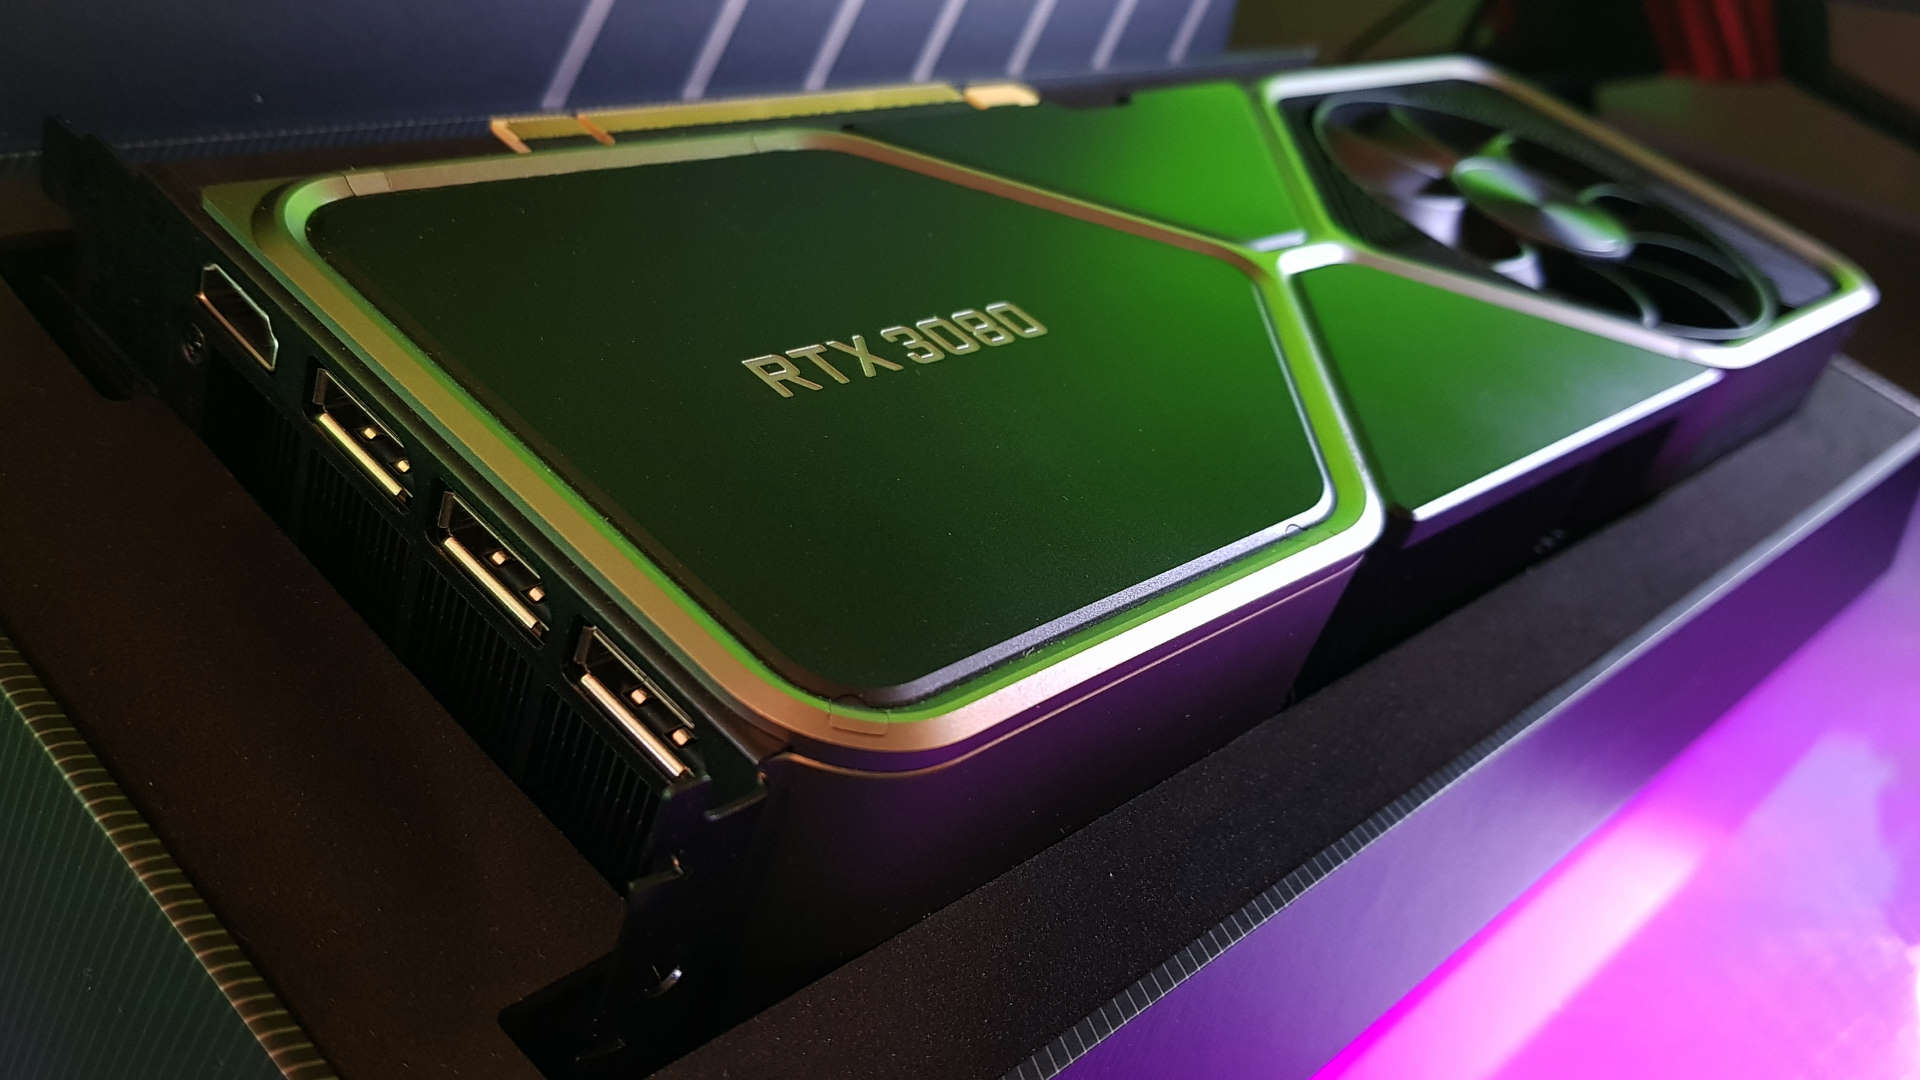 There will be no anti-mining LHR versions of existing Nvidia 